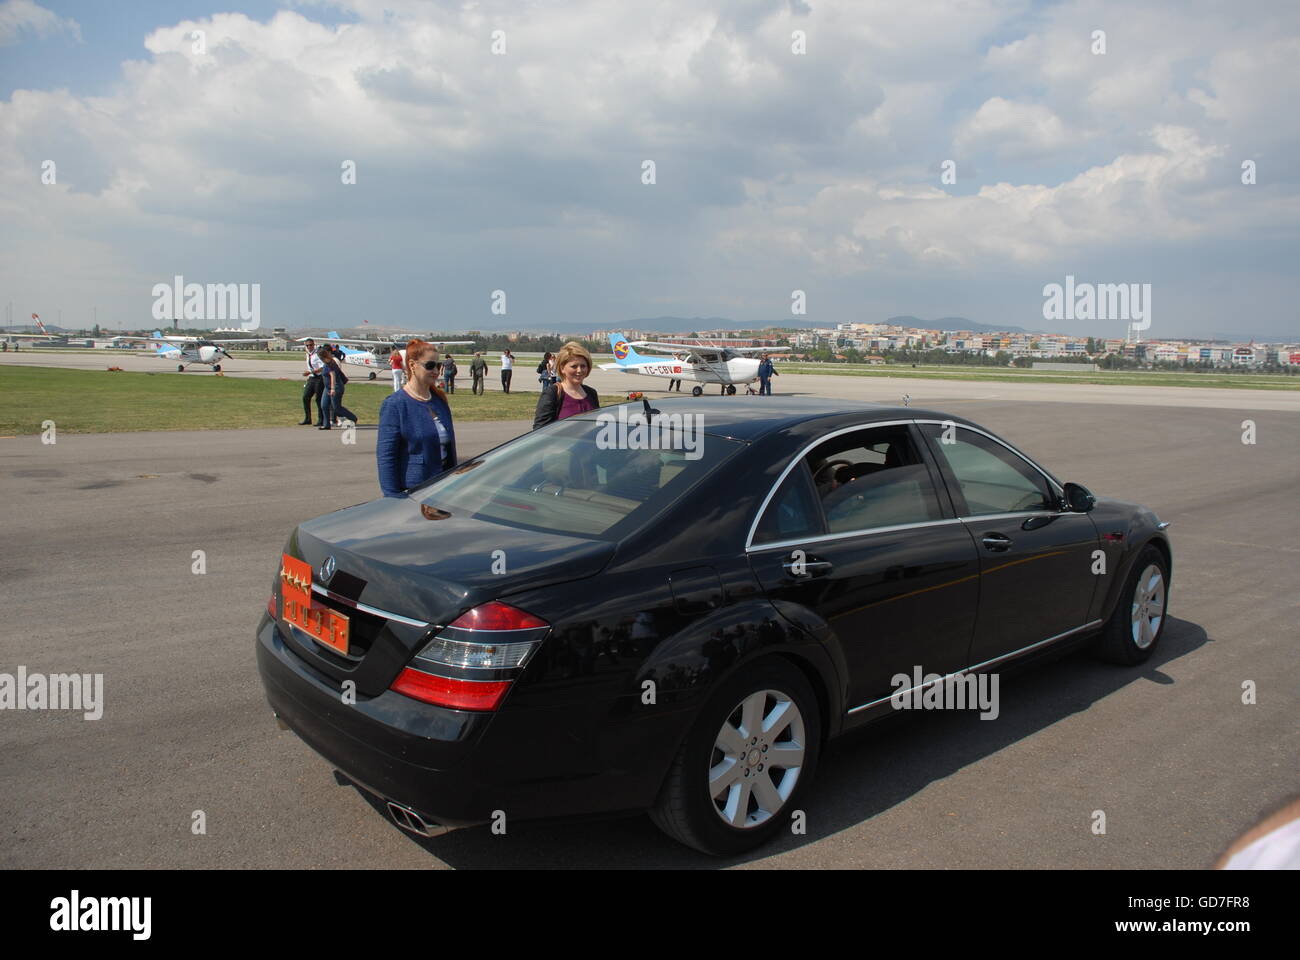 Turkish Air Force official car at the Turkish Air Association-THK Etimesgut Airport during the Air Festival Stock Photo